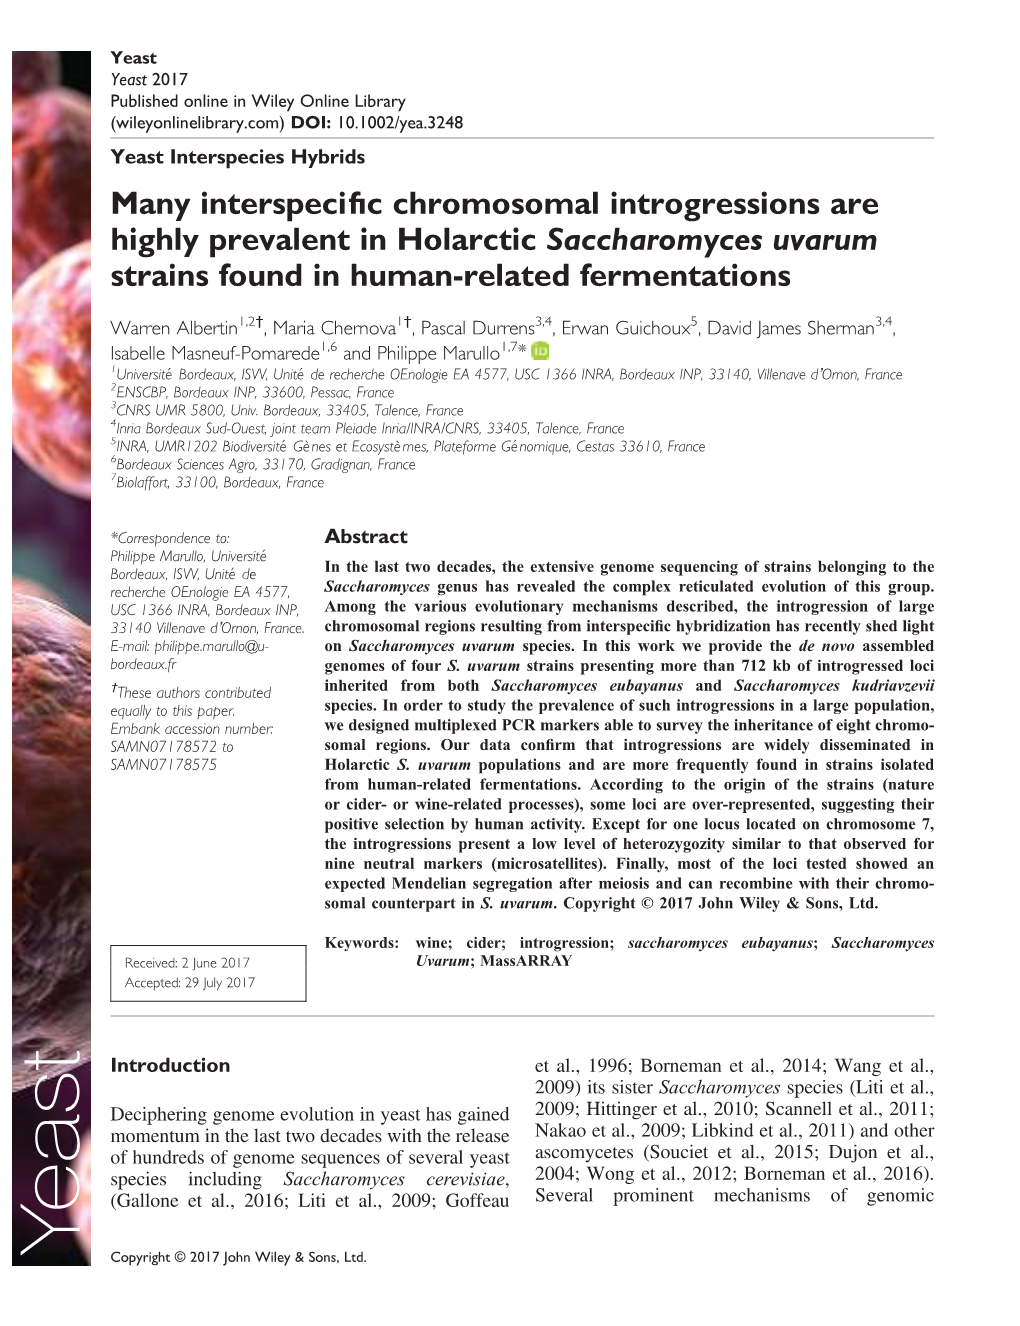 Many Interspecific Chromosomal Introgressions Are Highly Prevalent